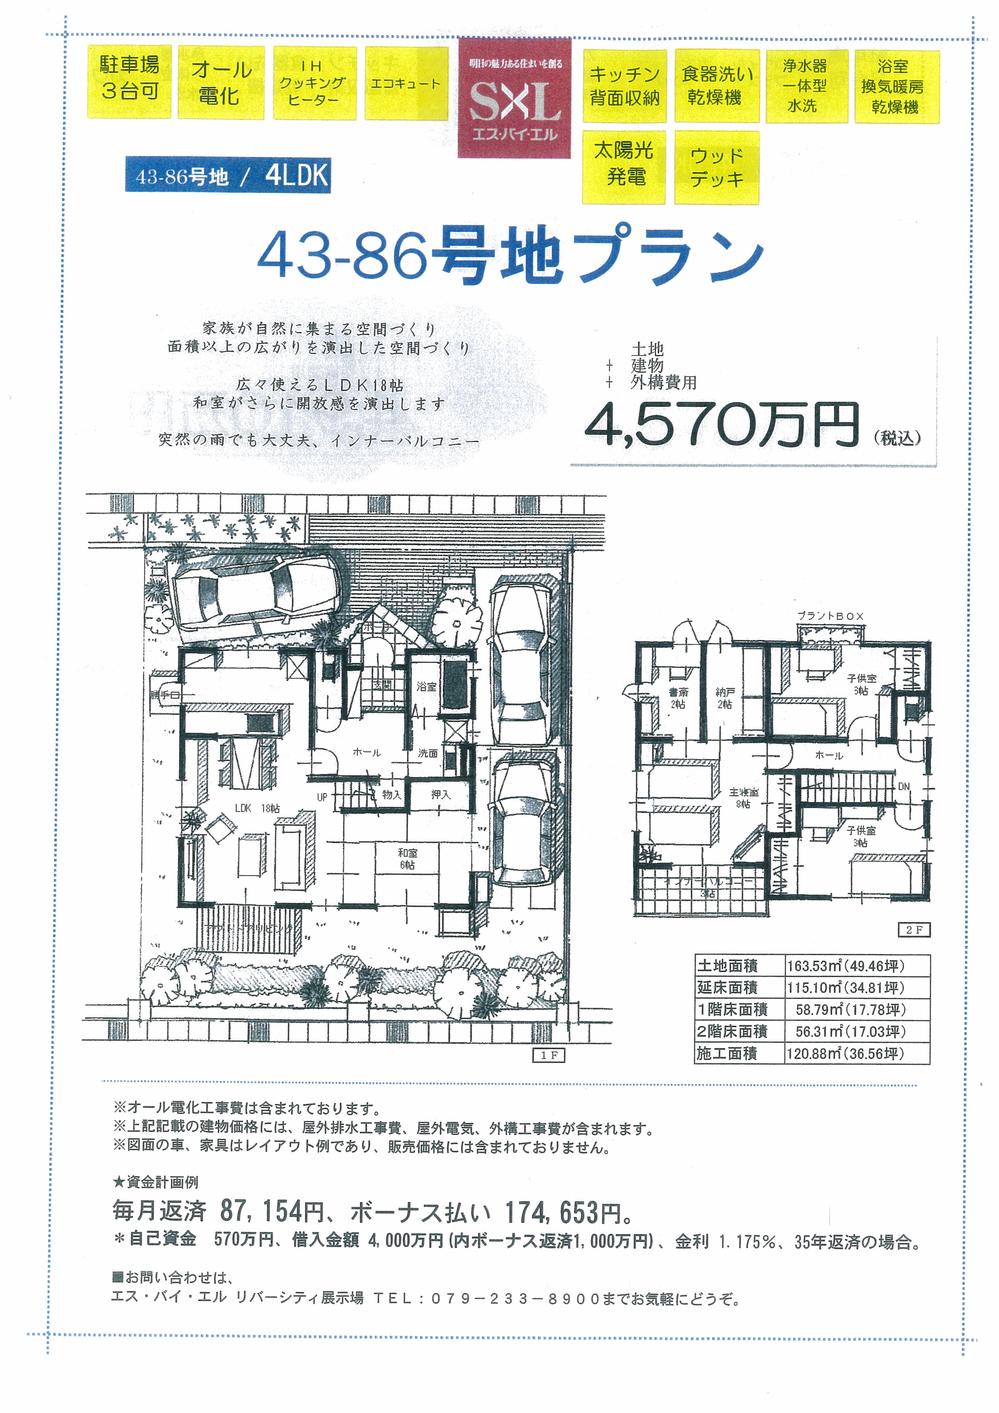 Other building plan example. Building plan example (43-86 No. land) ready-built sales price 45,700,000 yen, Building area 120.88 sq m